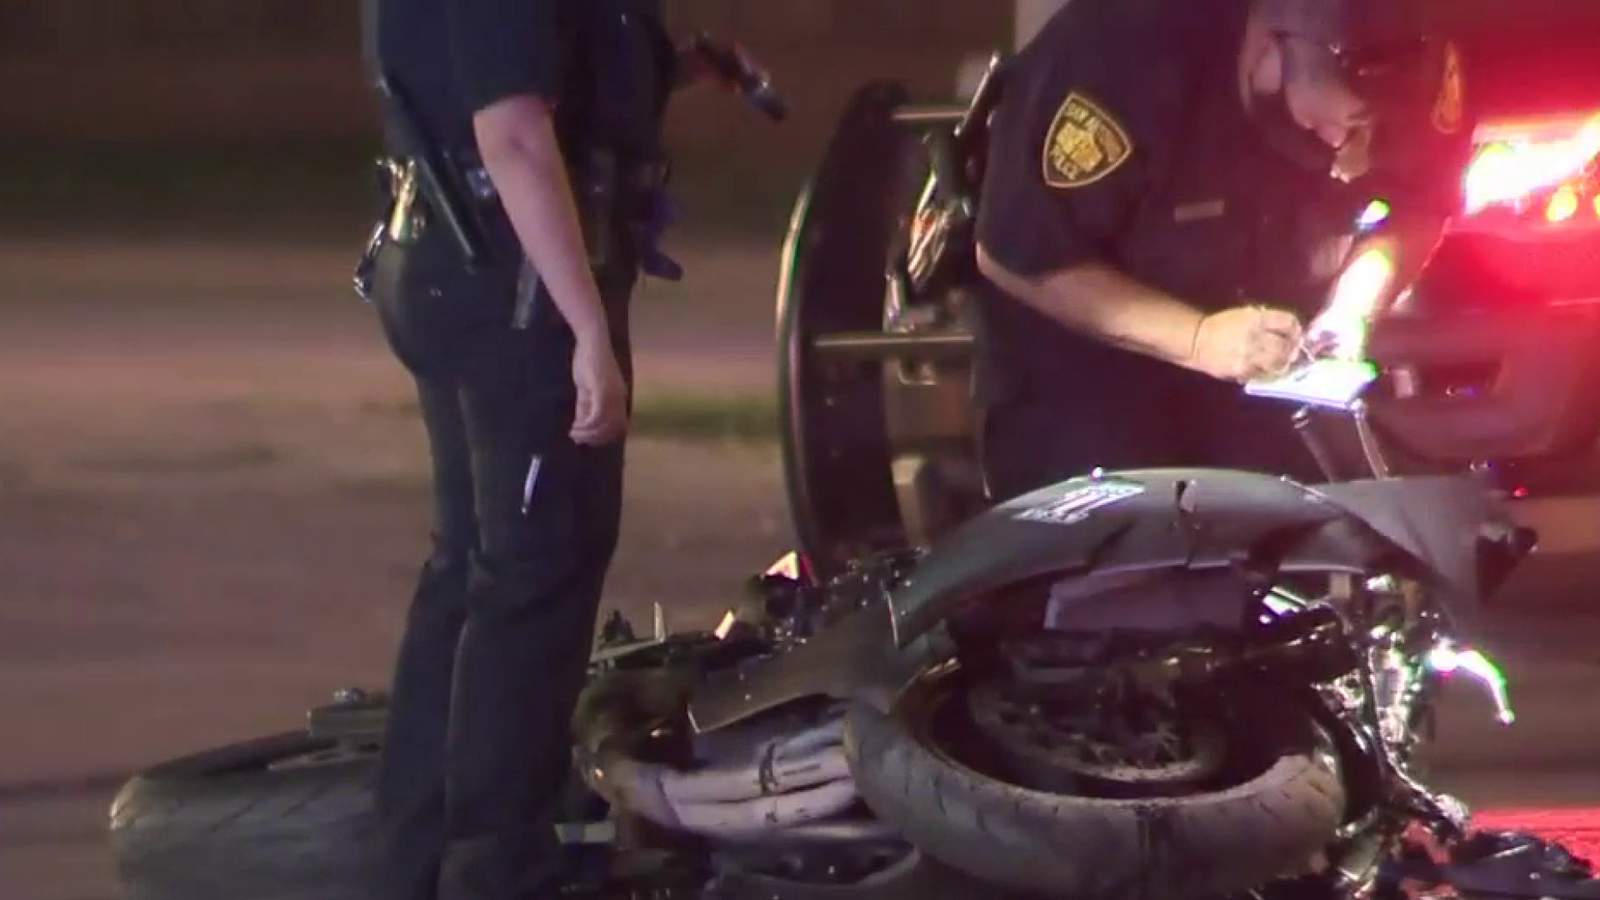 Motorcyclist hospitalized with life-threatening injuries after crash on Northwest Side, police say